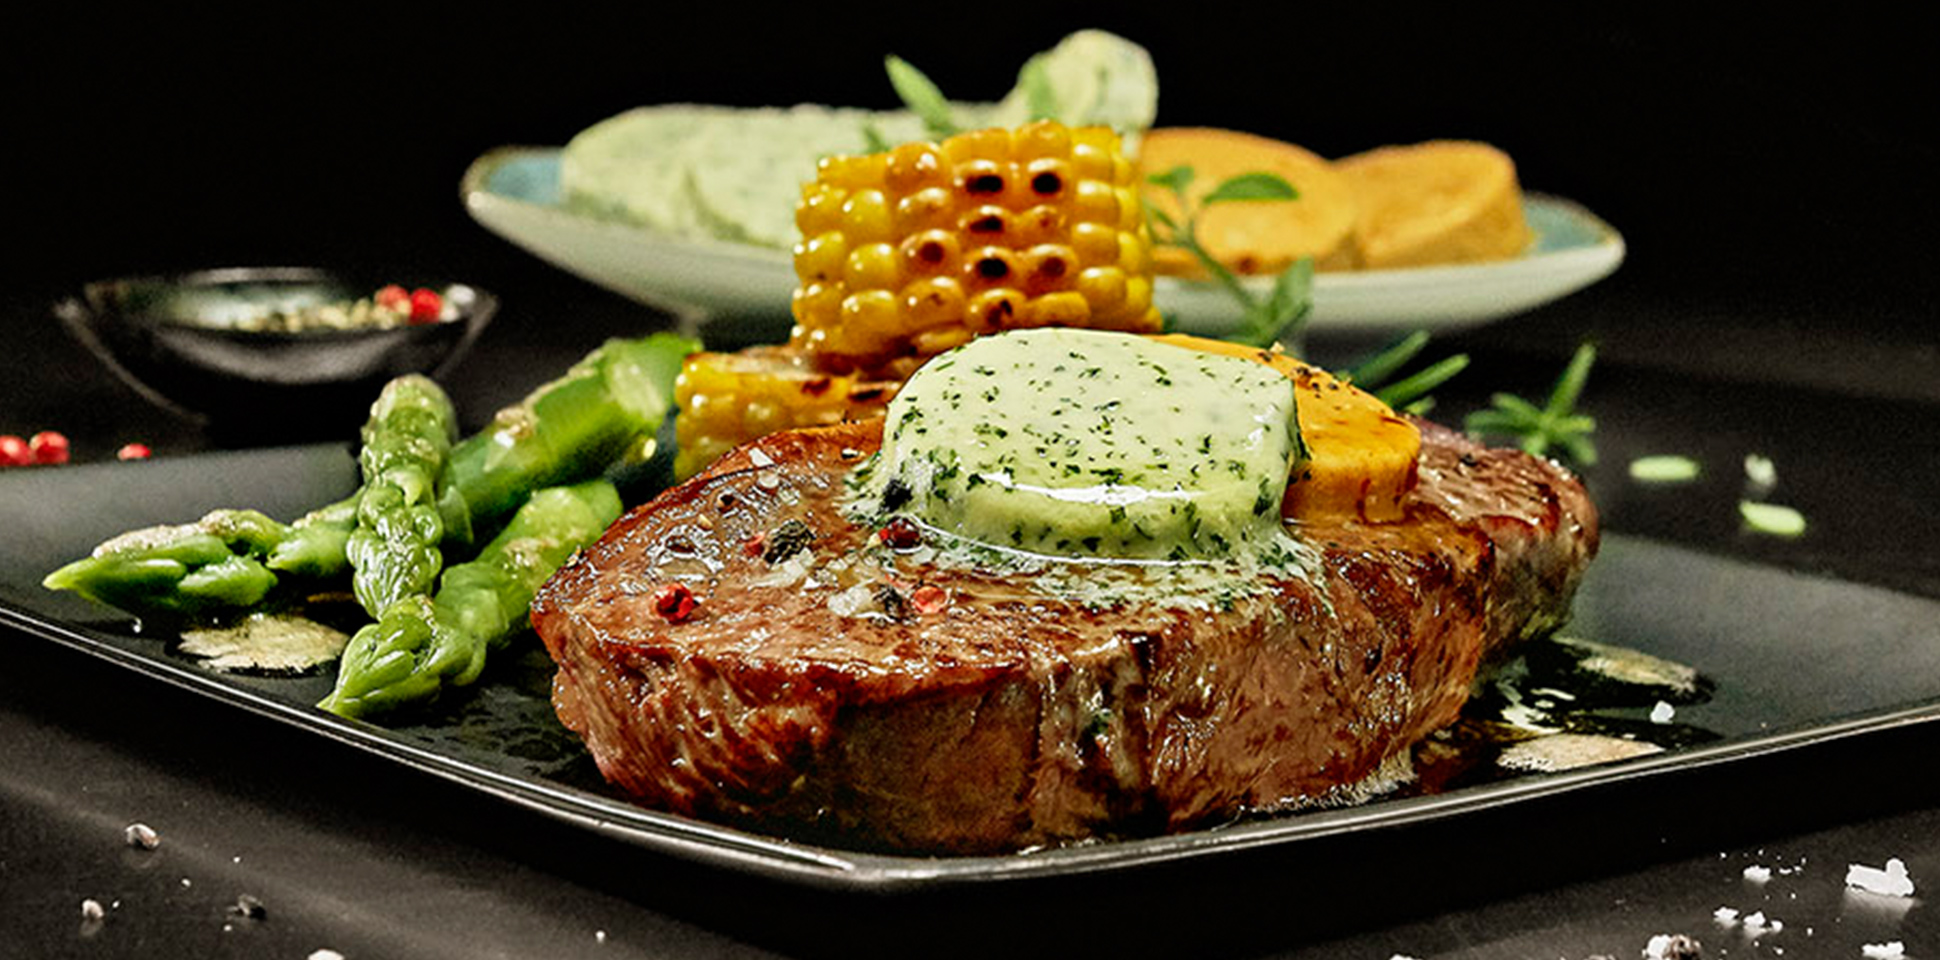 OLB_Product-Categories_OLB_M17_Butter_a_Steak_CloseUp_007_LoRes